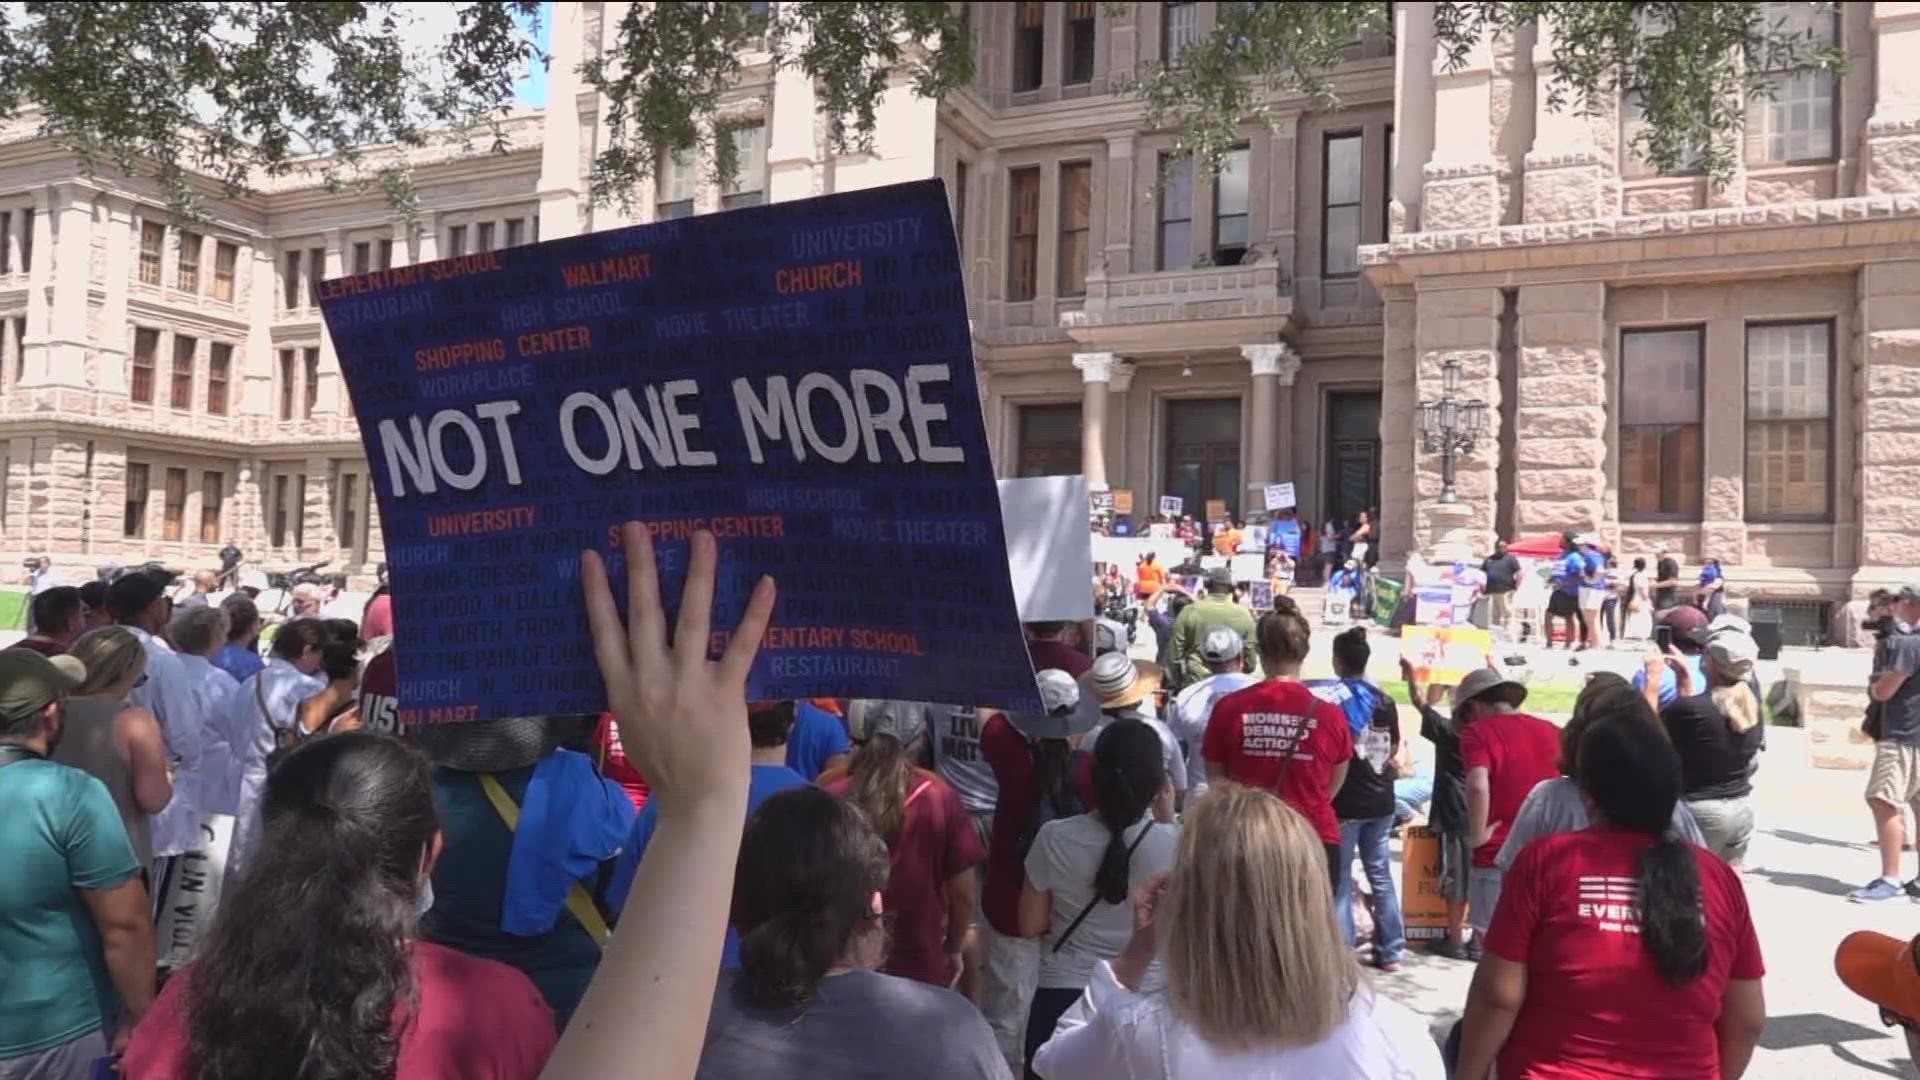 Families of the victims, along with mass shooting survivors and advocates, gathered at the Texas Capitol on Saturday.